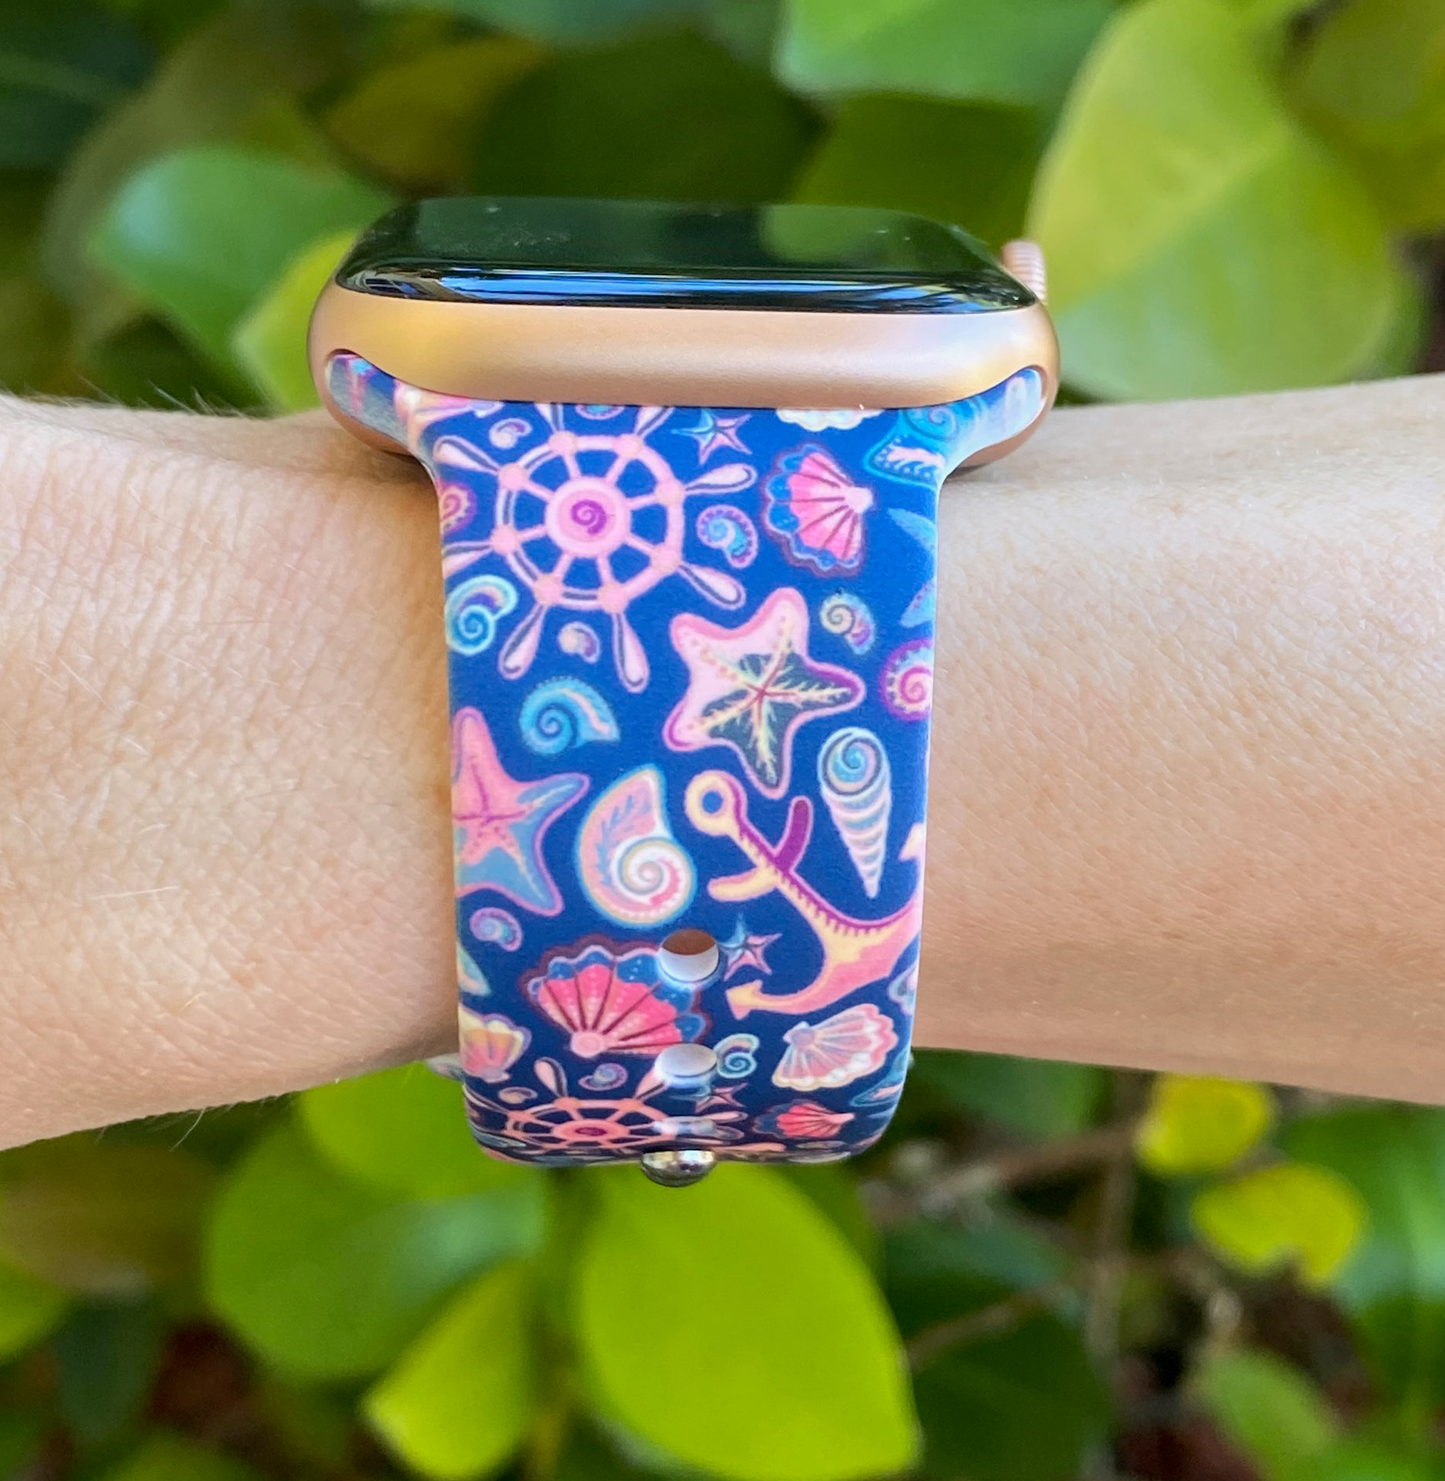 Seashell and Anchors Apple Watch Band